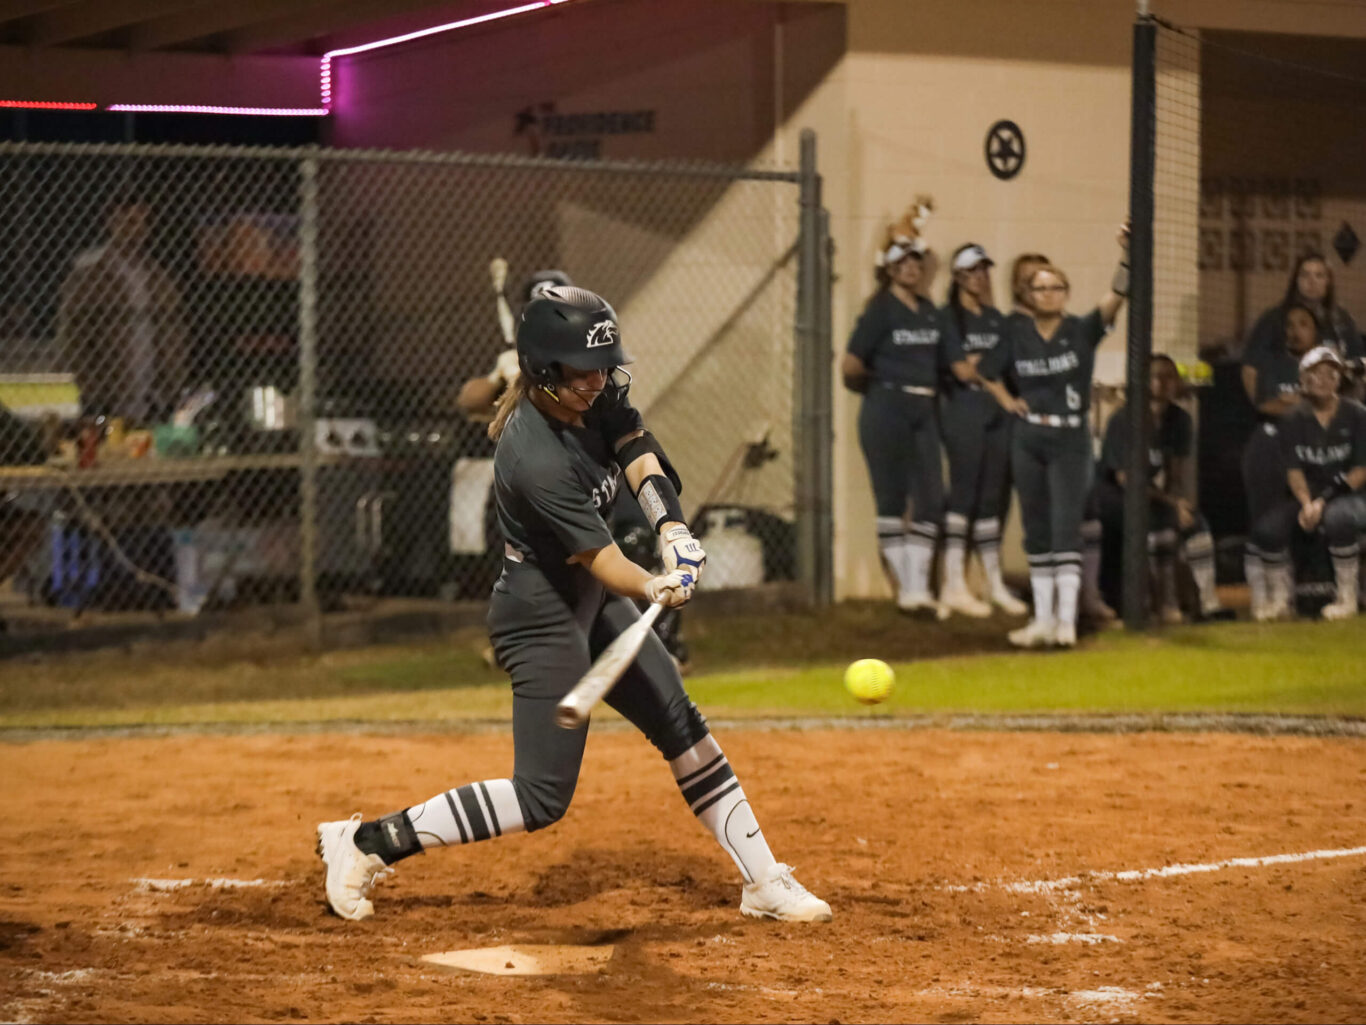 A softball player, typically a girl, swings at a ball during a game.